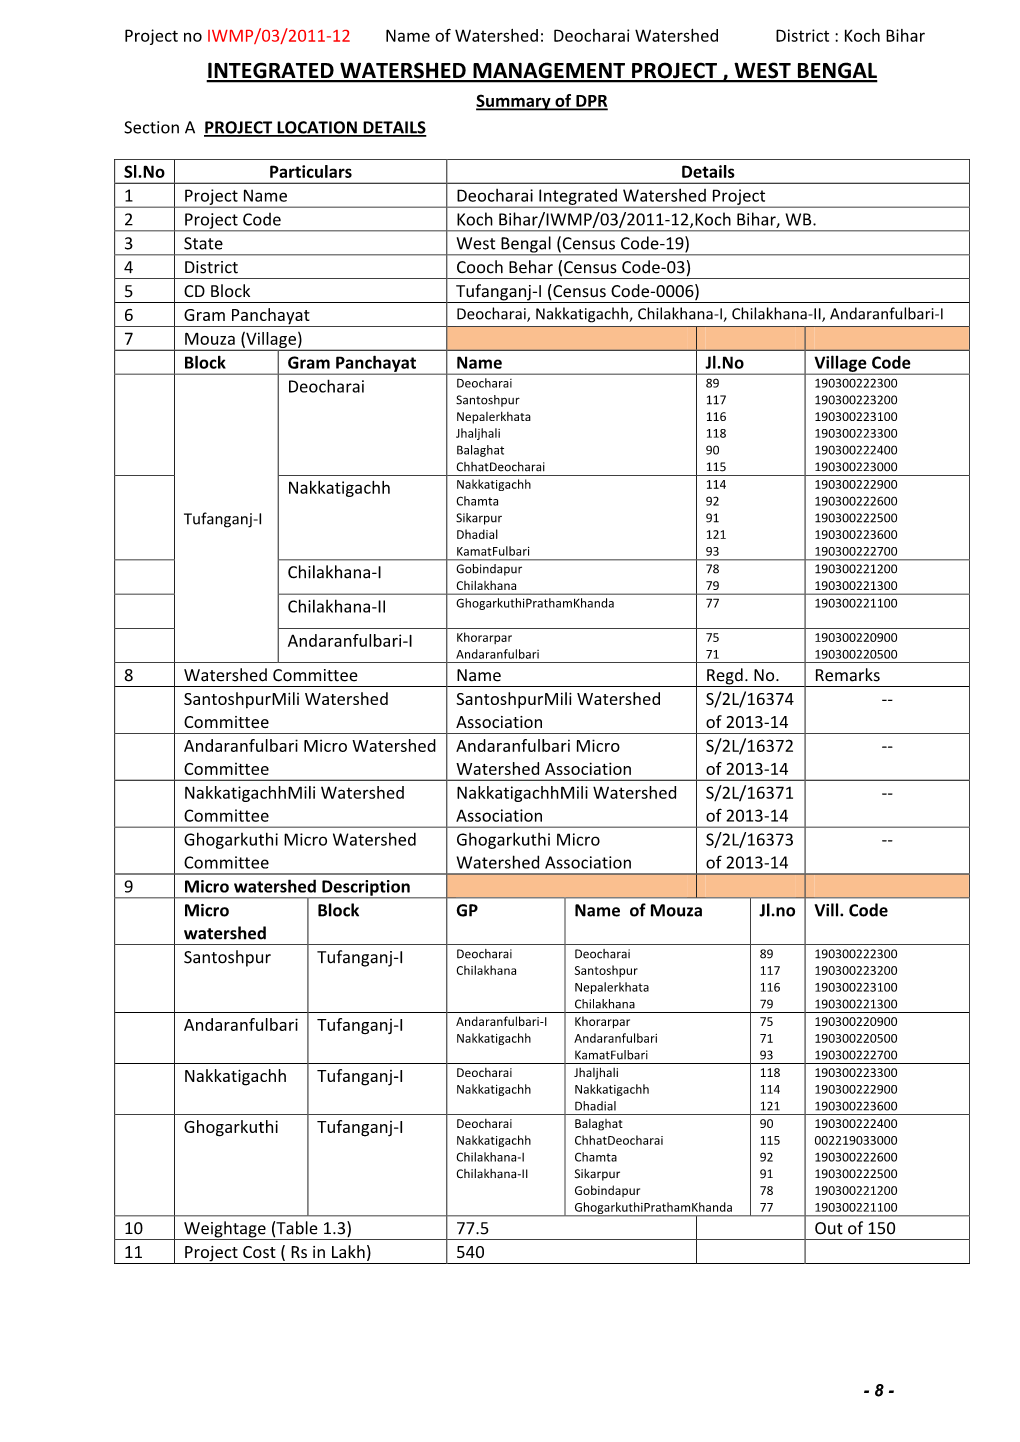 INTEGRATED WATERSHED MANAGEMENT PROJECT , WEST BENGAL Summary of DPR Section a PROJECT LOCATION DETAILS